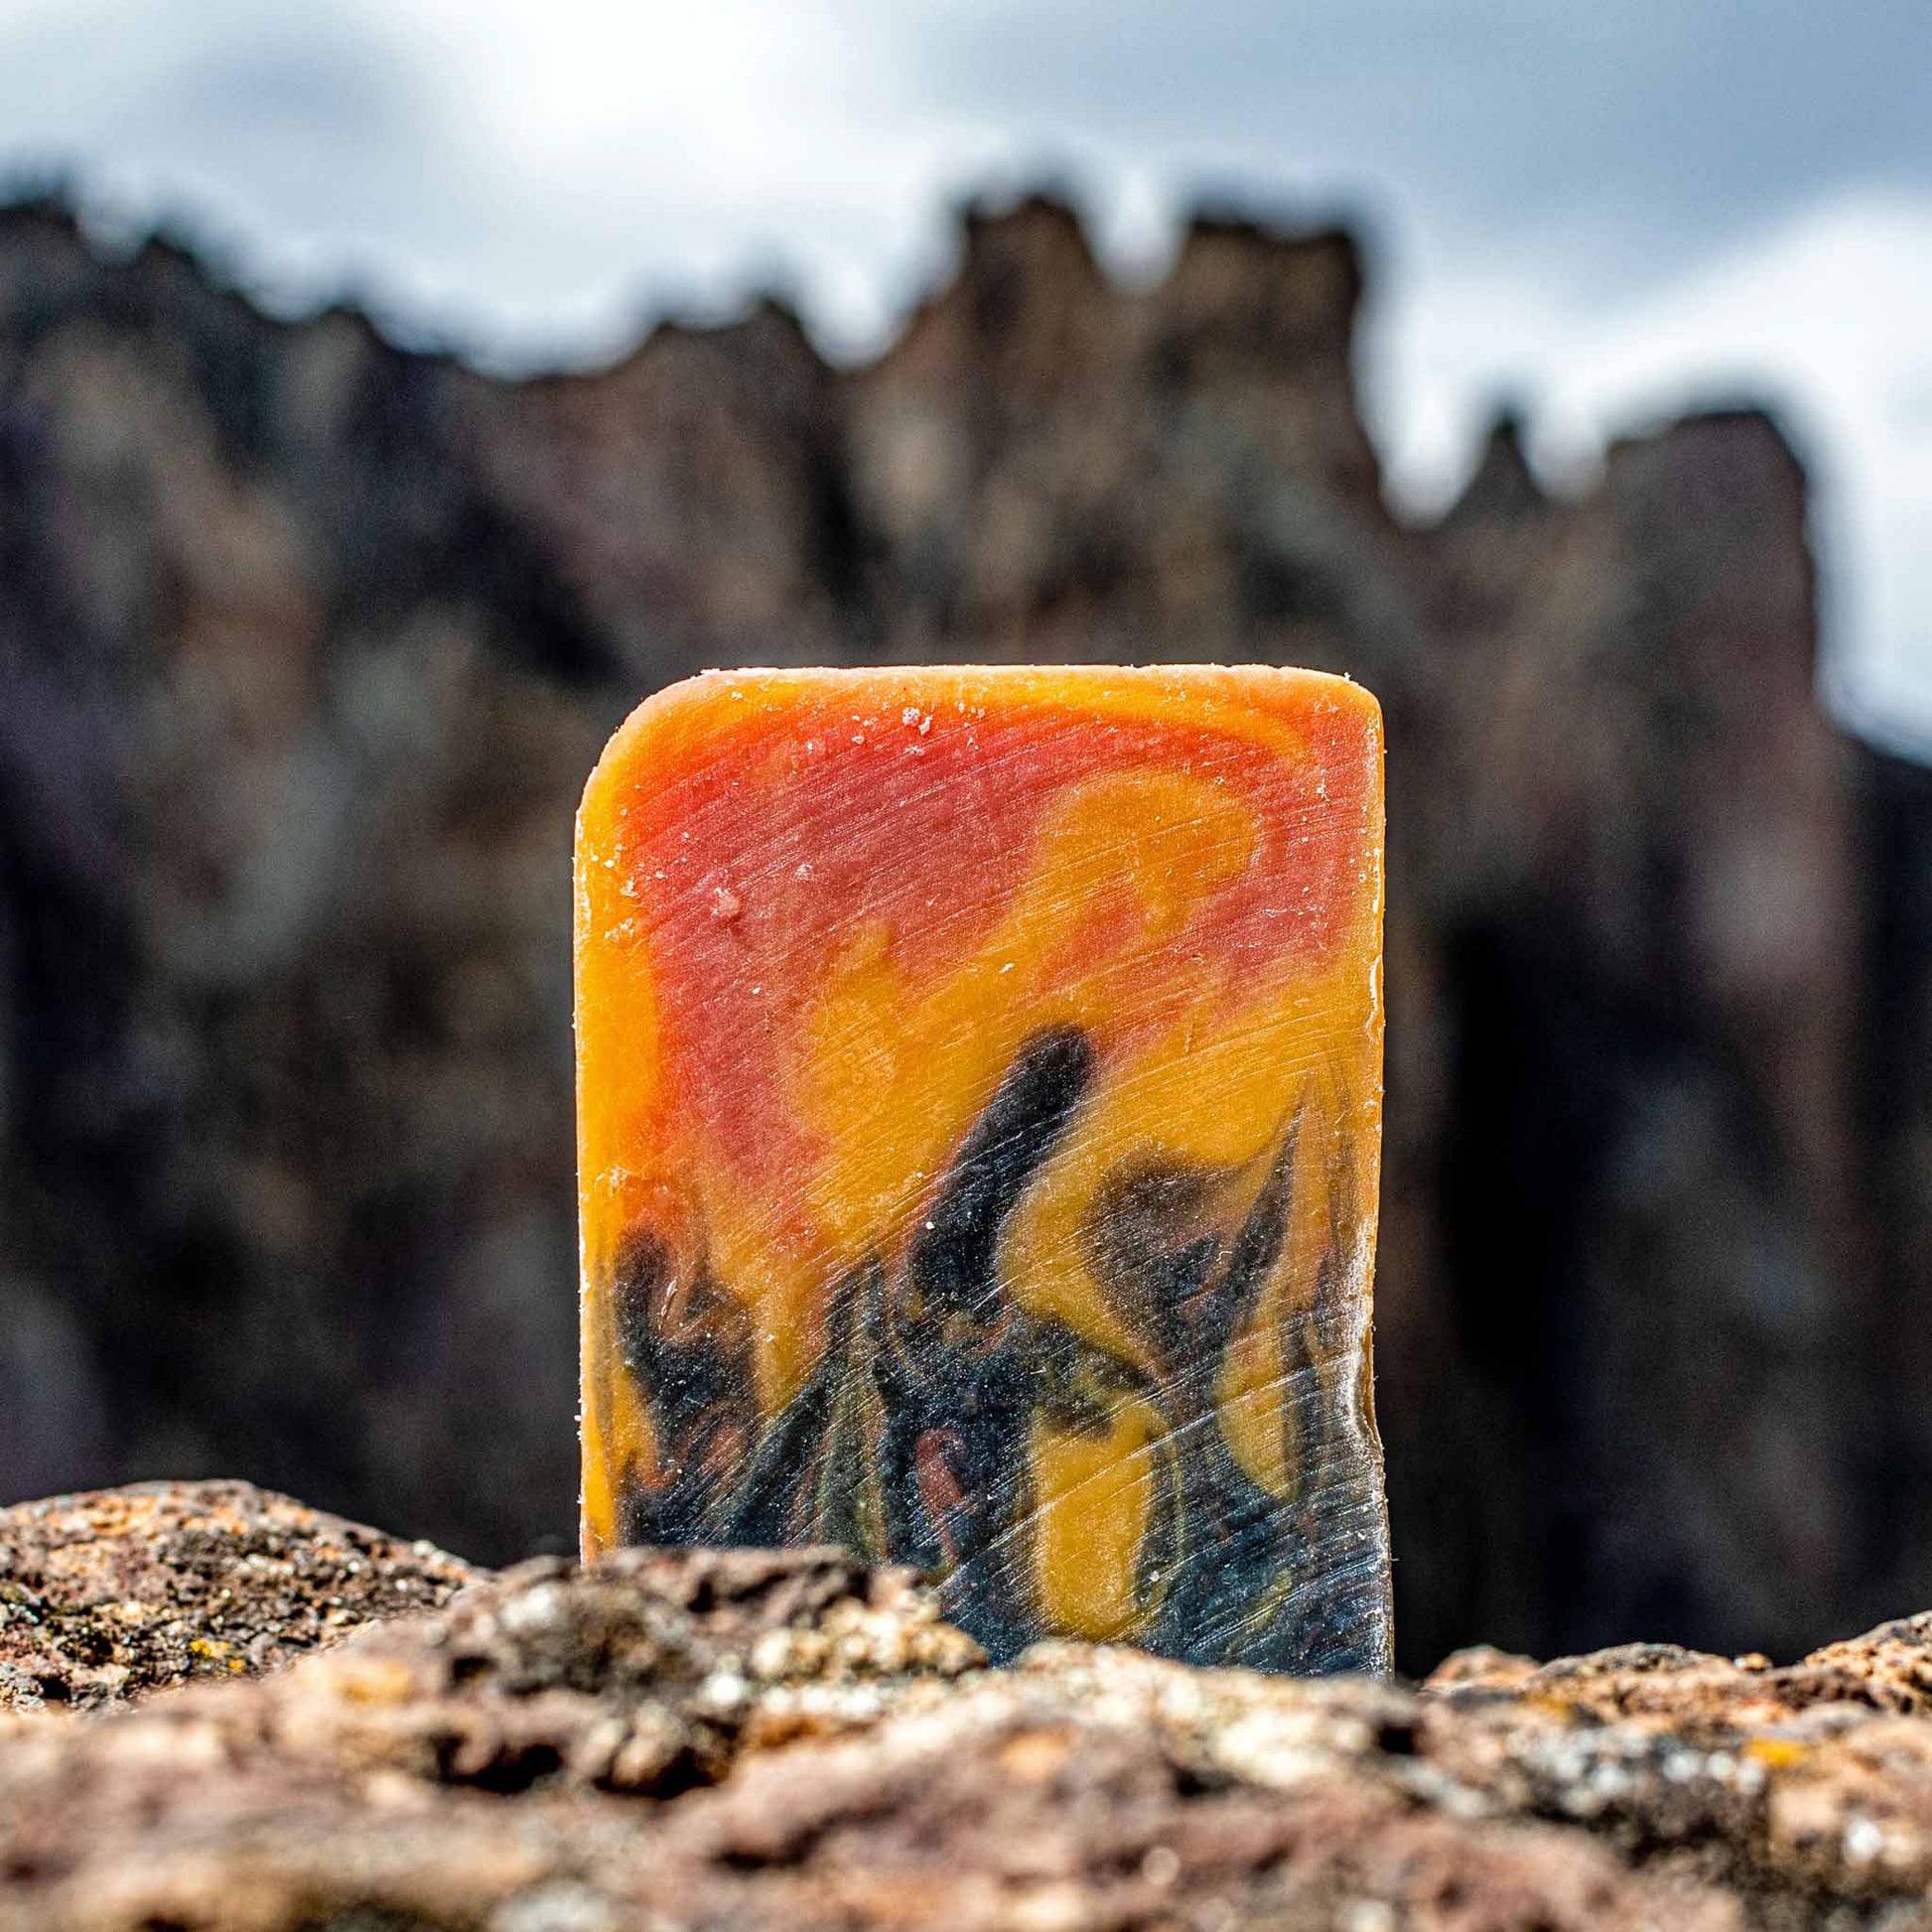 Handmade natural bar soap in Fire in the Hole scent from Outlaw